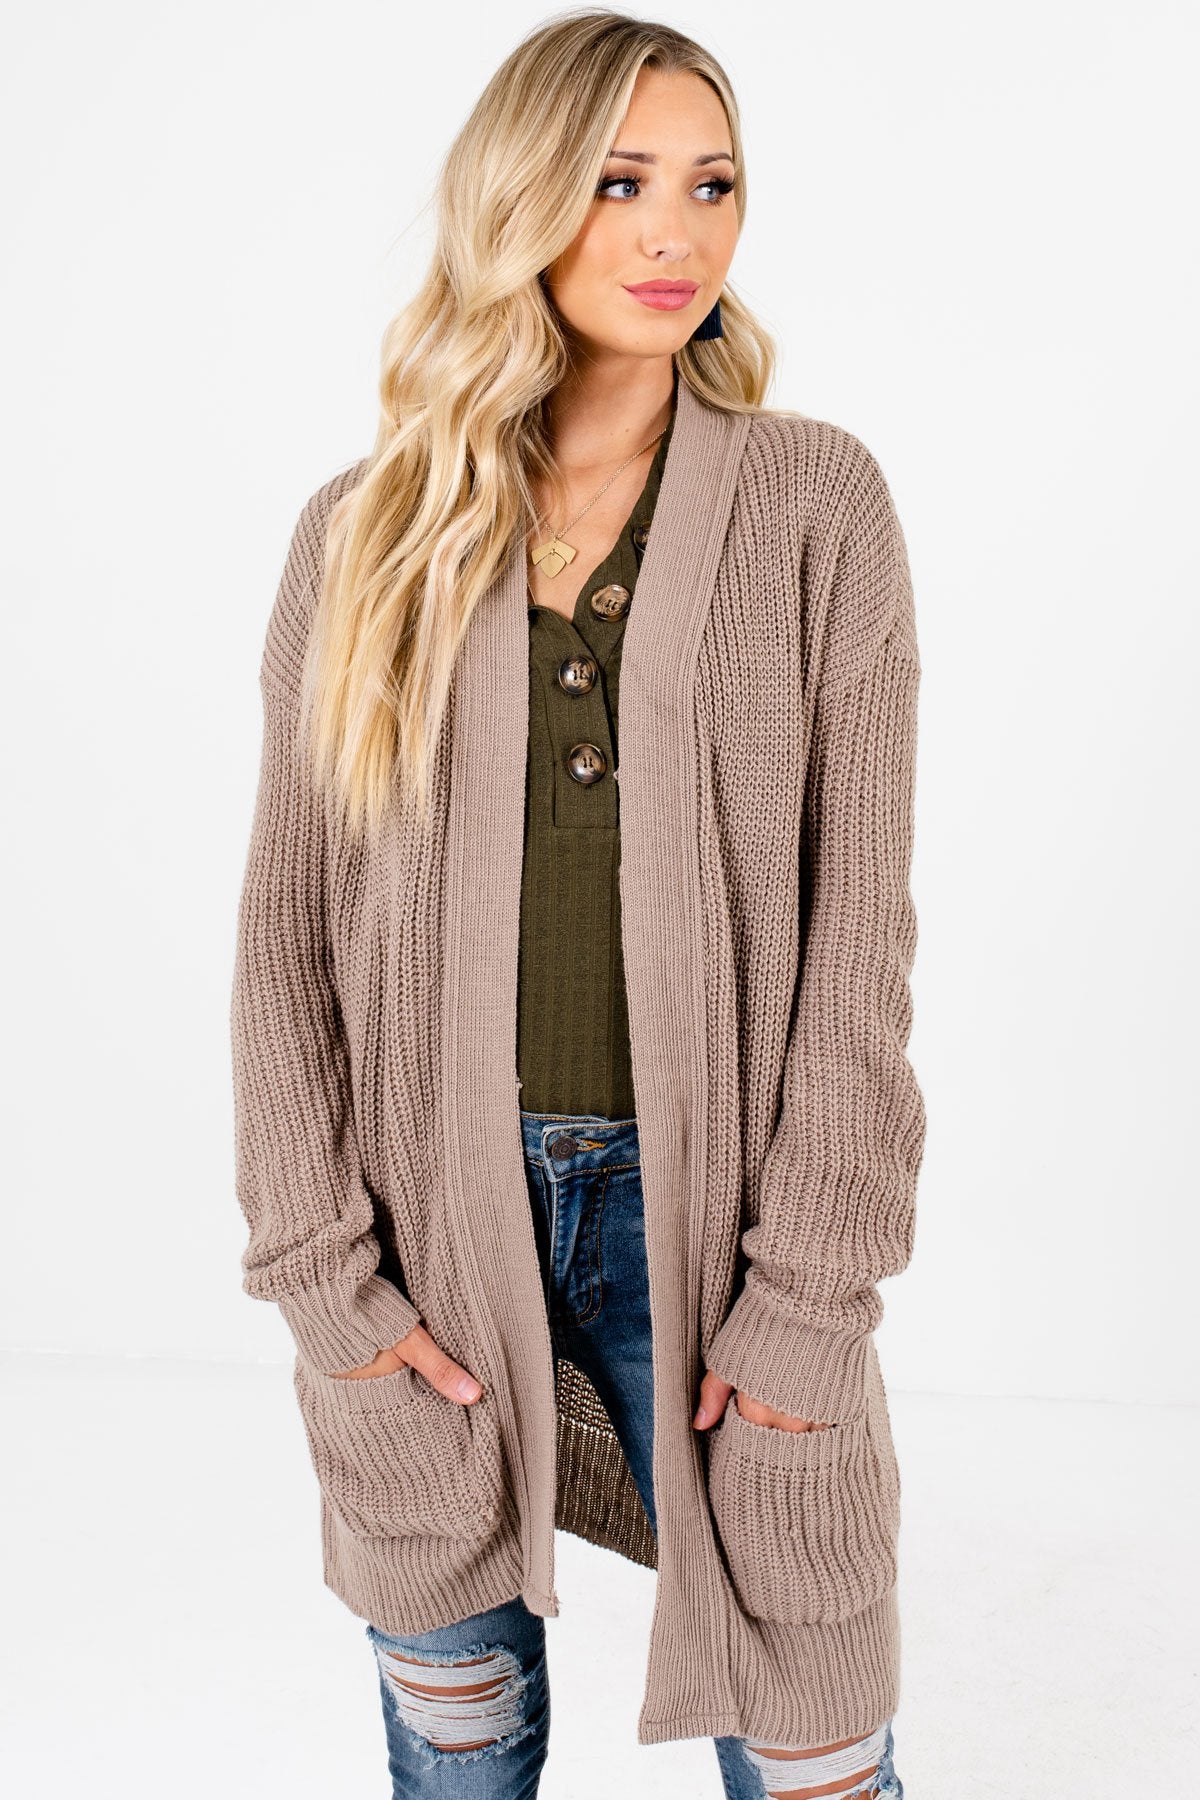 Taupe Brown High-Quality Knit Material Boutique Cardigans for Women